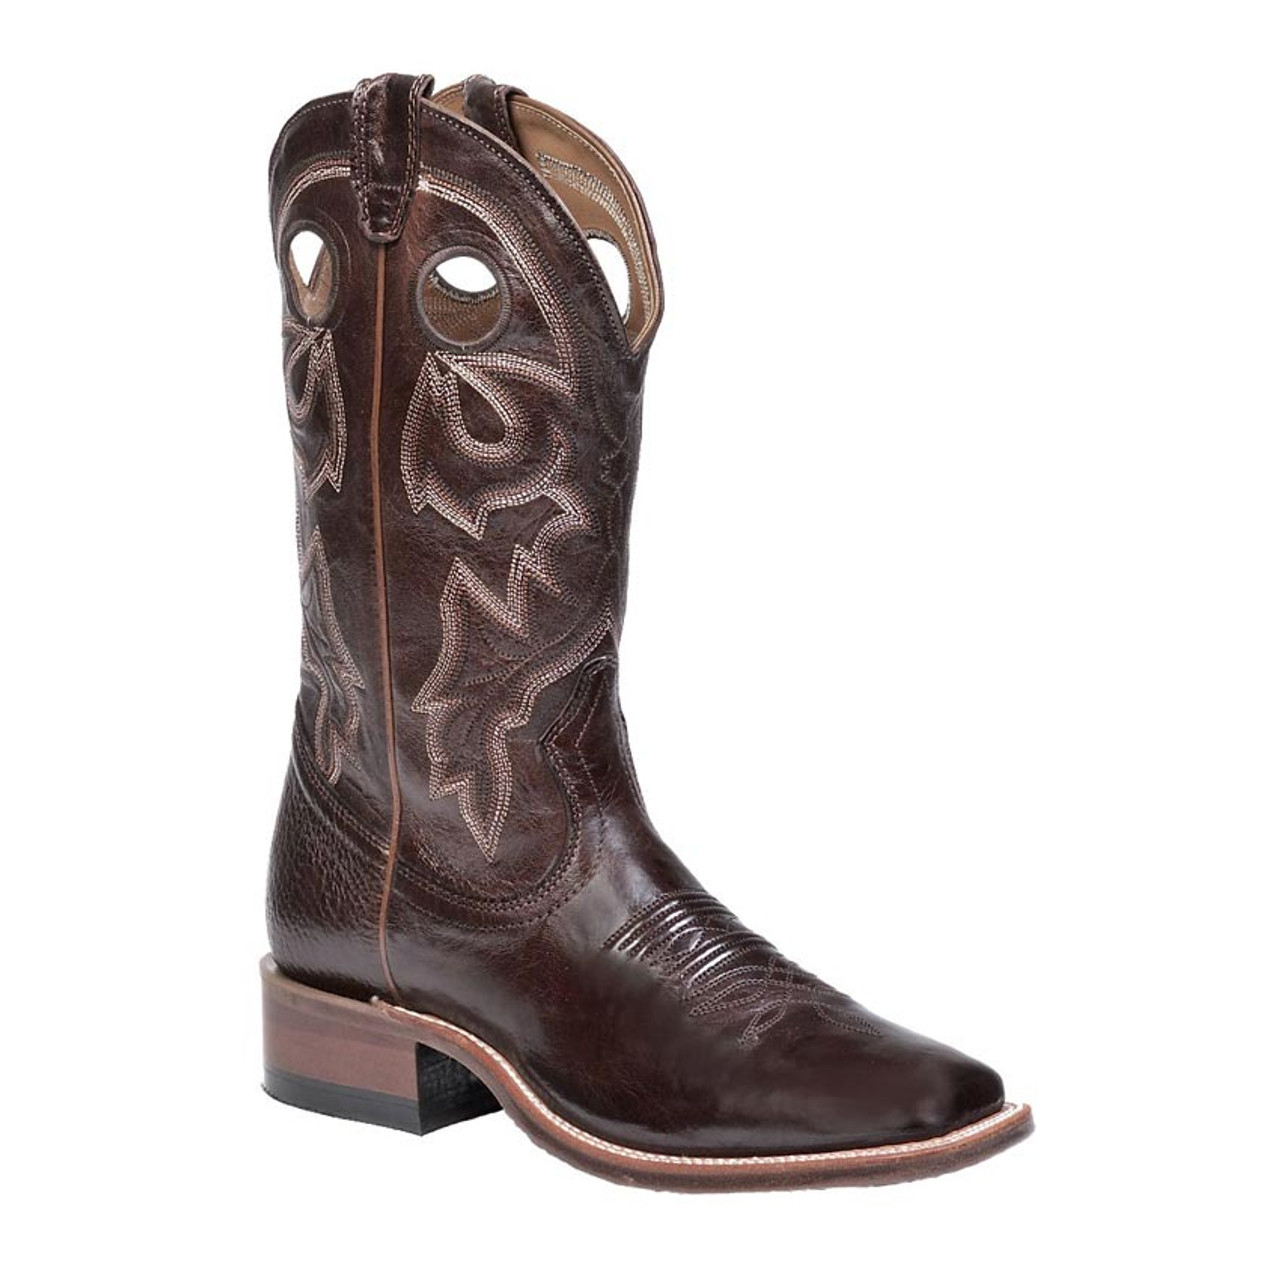 12 wide womens boots